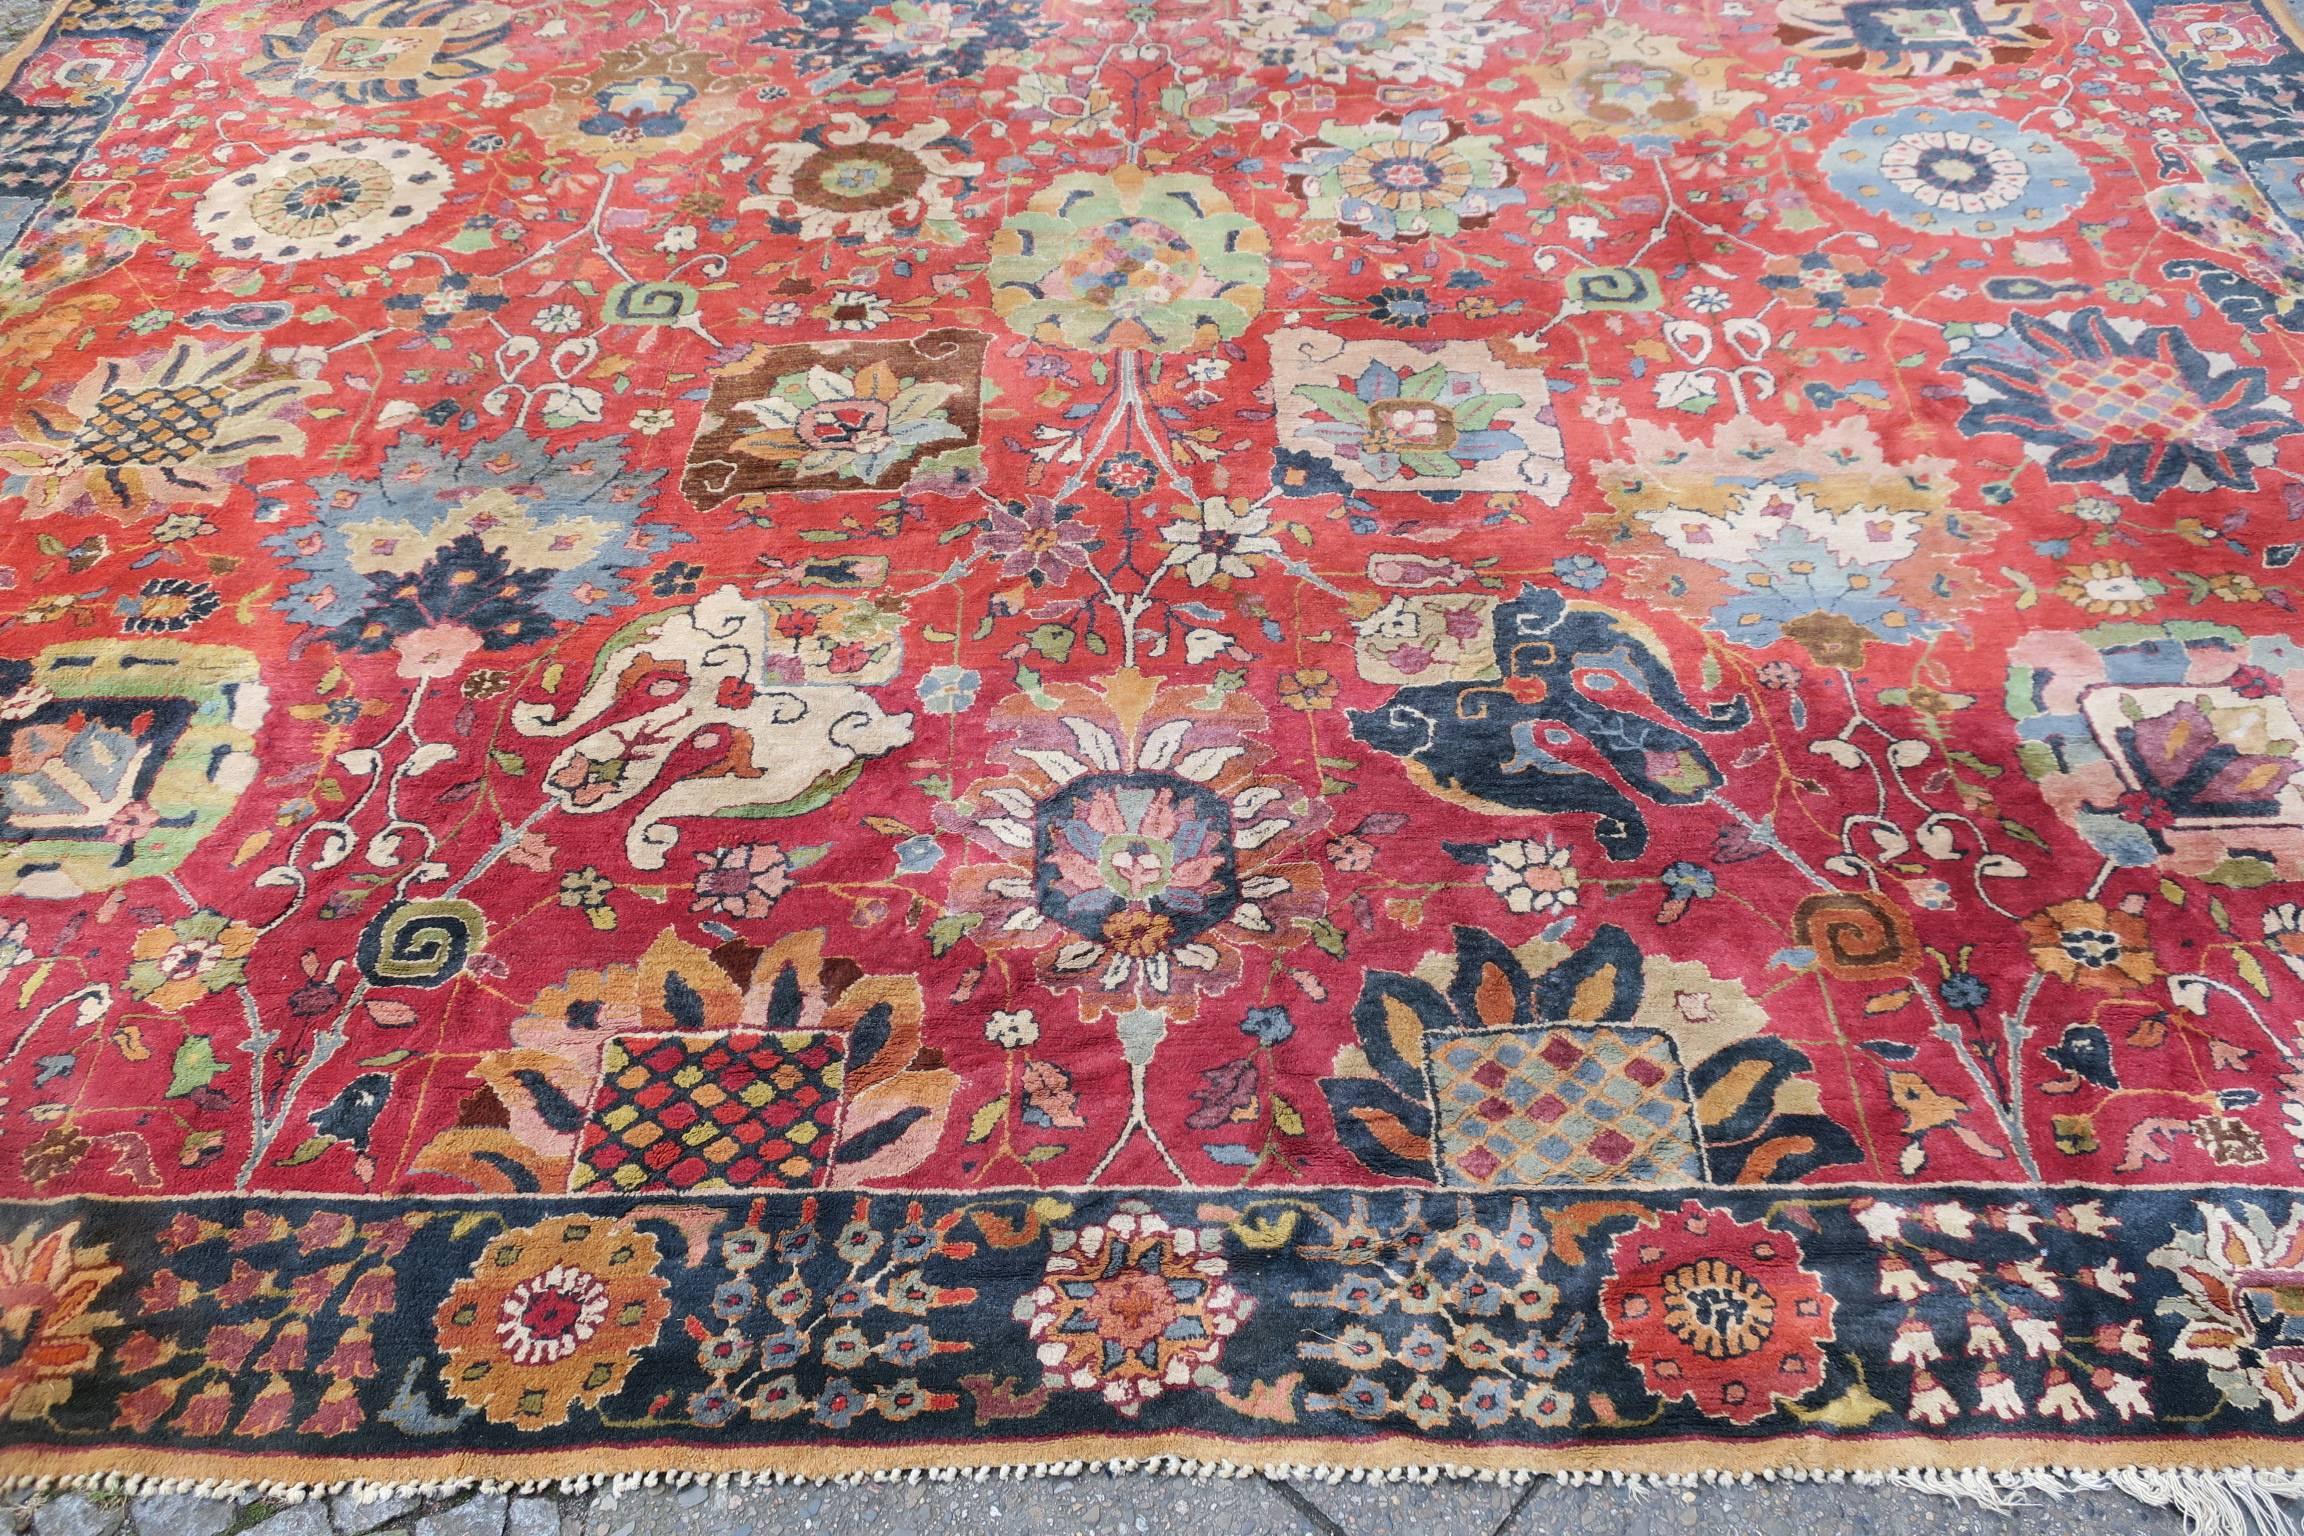 European hooked carpet probably Austrian or German dating from the early part of the 20th century. The rug has very beautiful colors and a classical 'Shah Abbas' or 'Vase' design of large palmettes on a soft red background. It is in very good